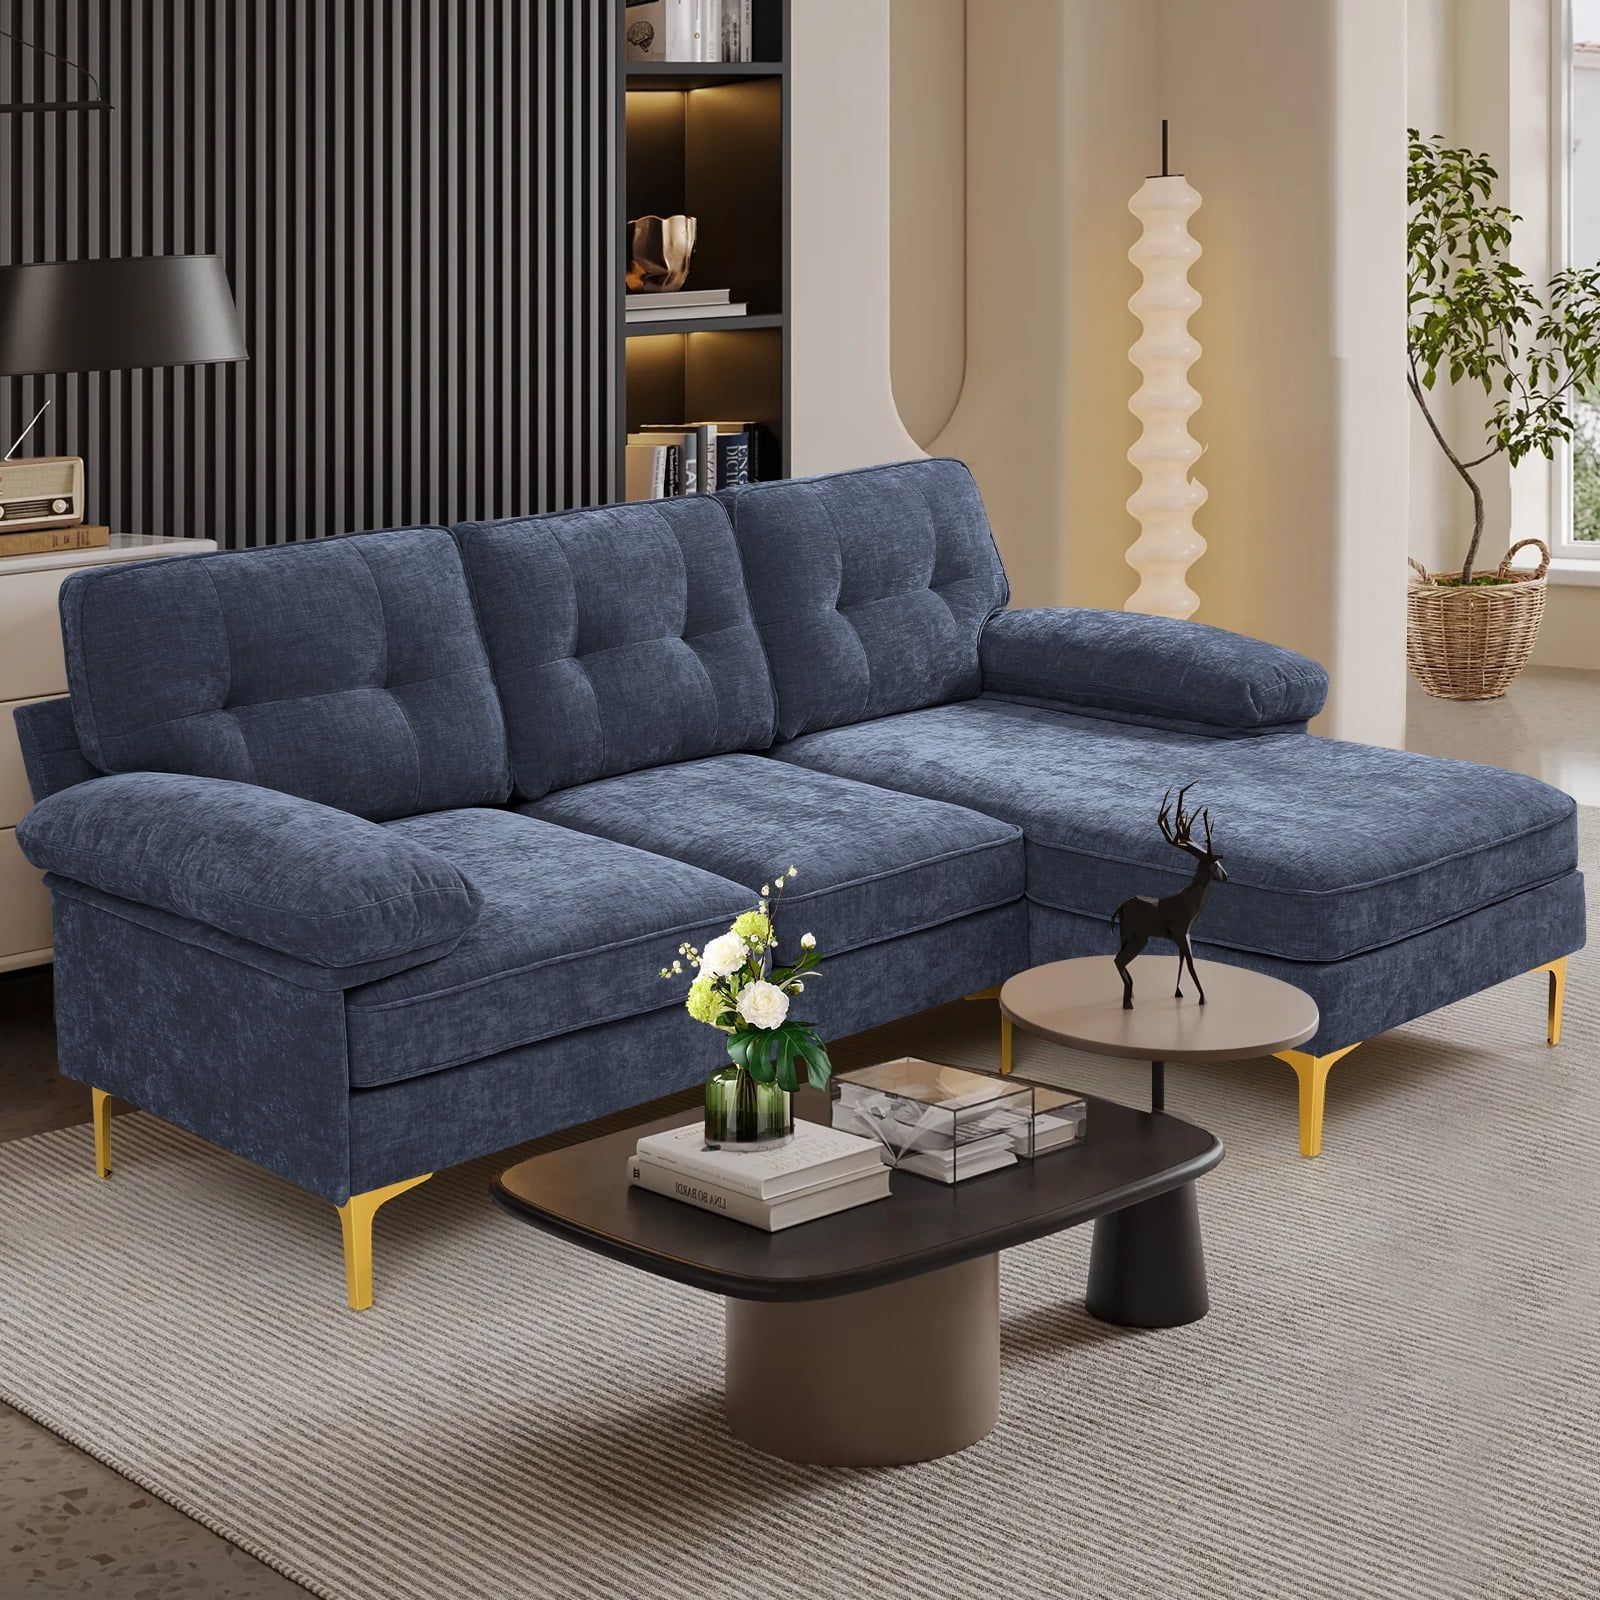 Ingalik Convertible Sectional Sofa Couch, Convertible L Shaped Couch With  Reversible Chaise, Sectional Couch For Small Space Apartment, 3 Seater,  Yellow – Walmart Pertaining To Convertible L Shaped Sectional Sofas (View 22 of 24)